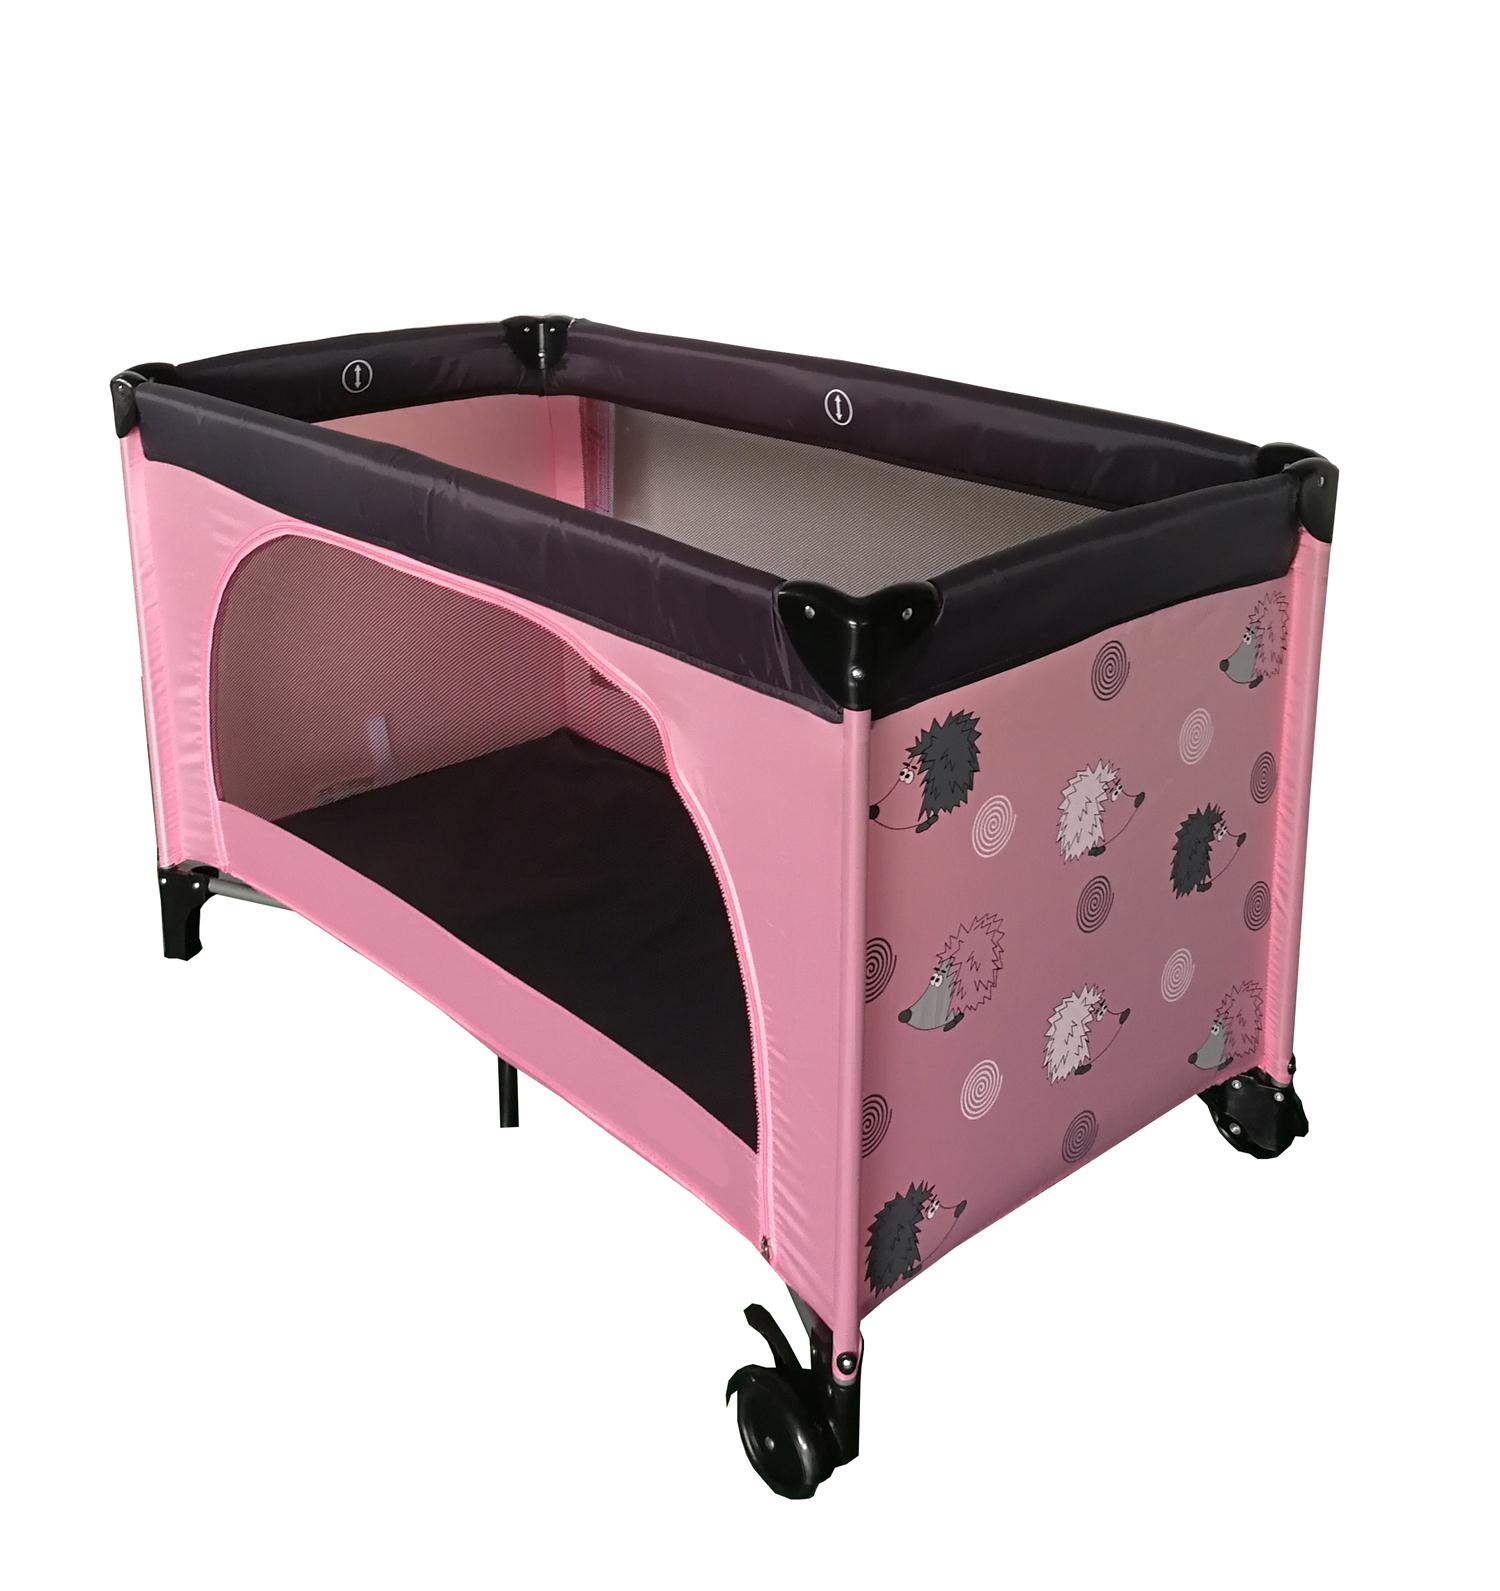 Baby camping cot girl cribs travel bed